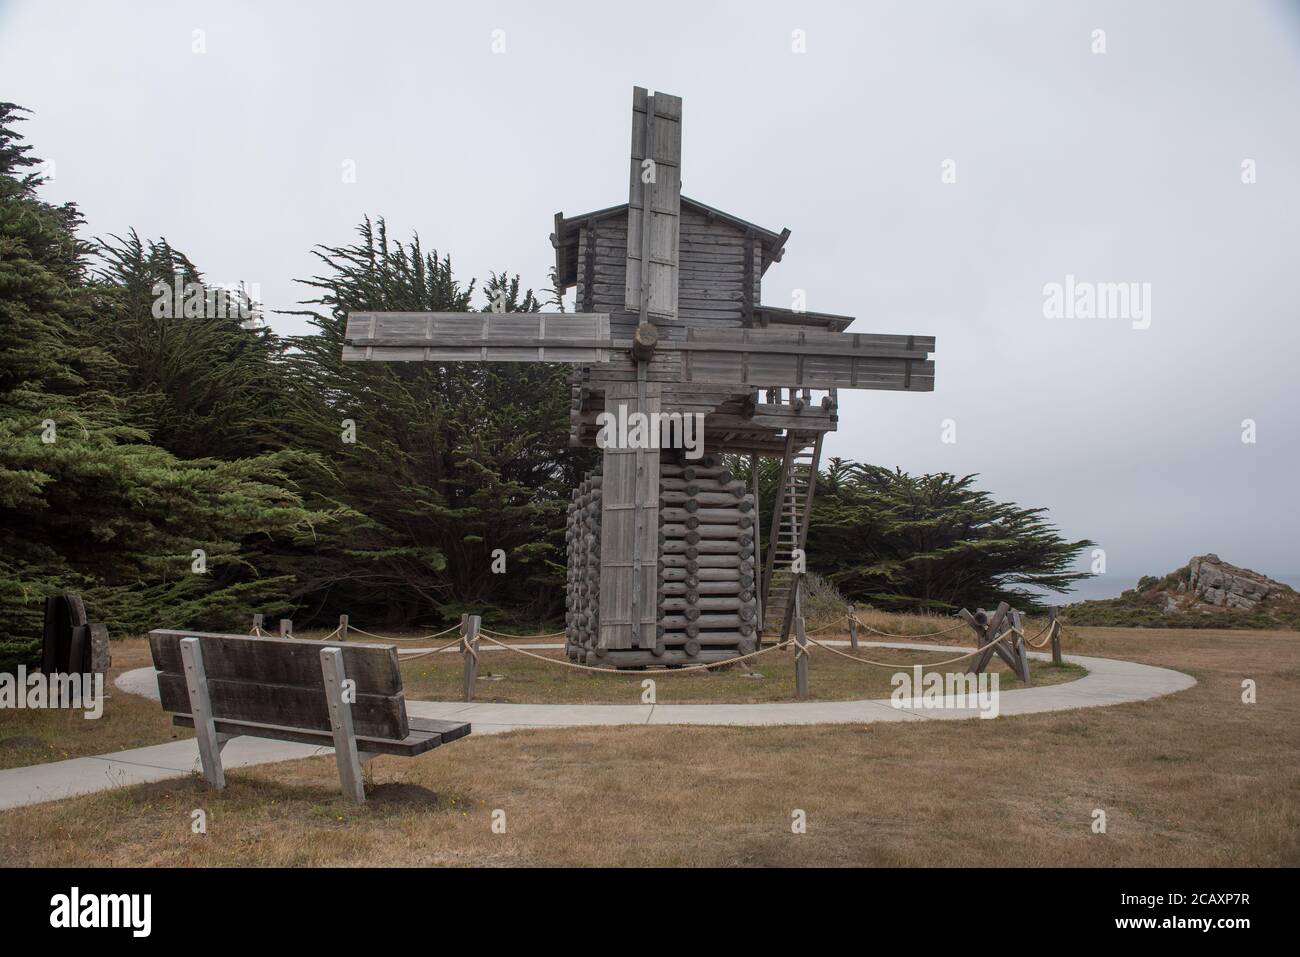 Old Mill in Fort Ross State Park, California, USA, close-up, on a foggy, overcast day typical of the Sonoma Coast. Stock Photo